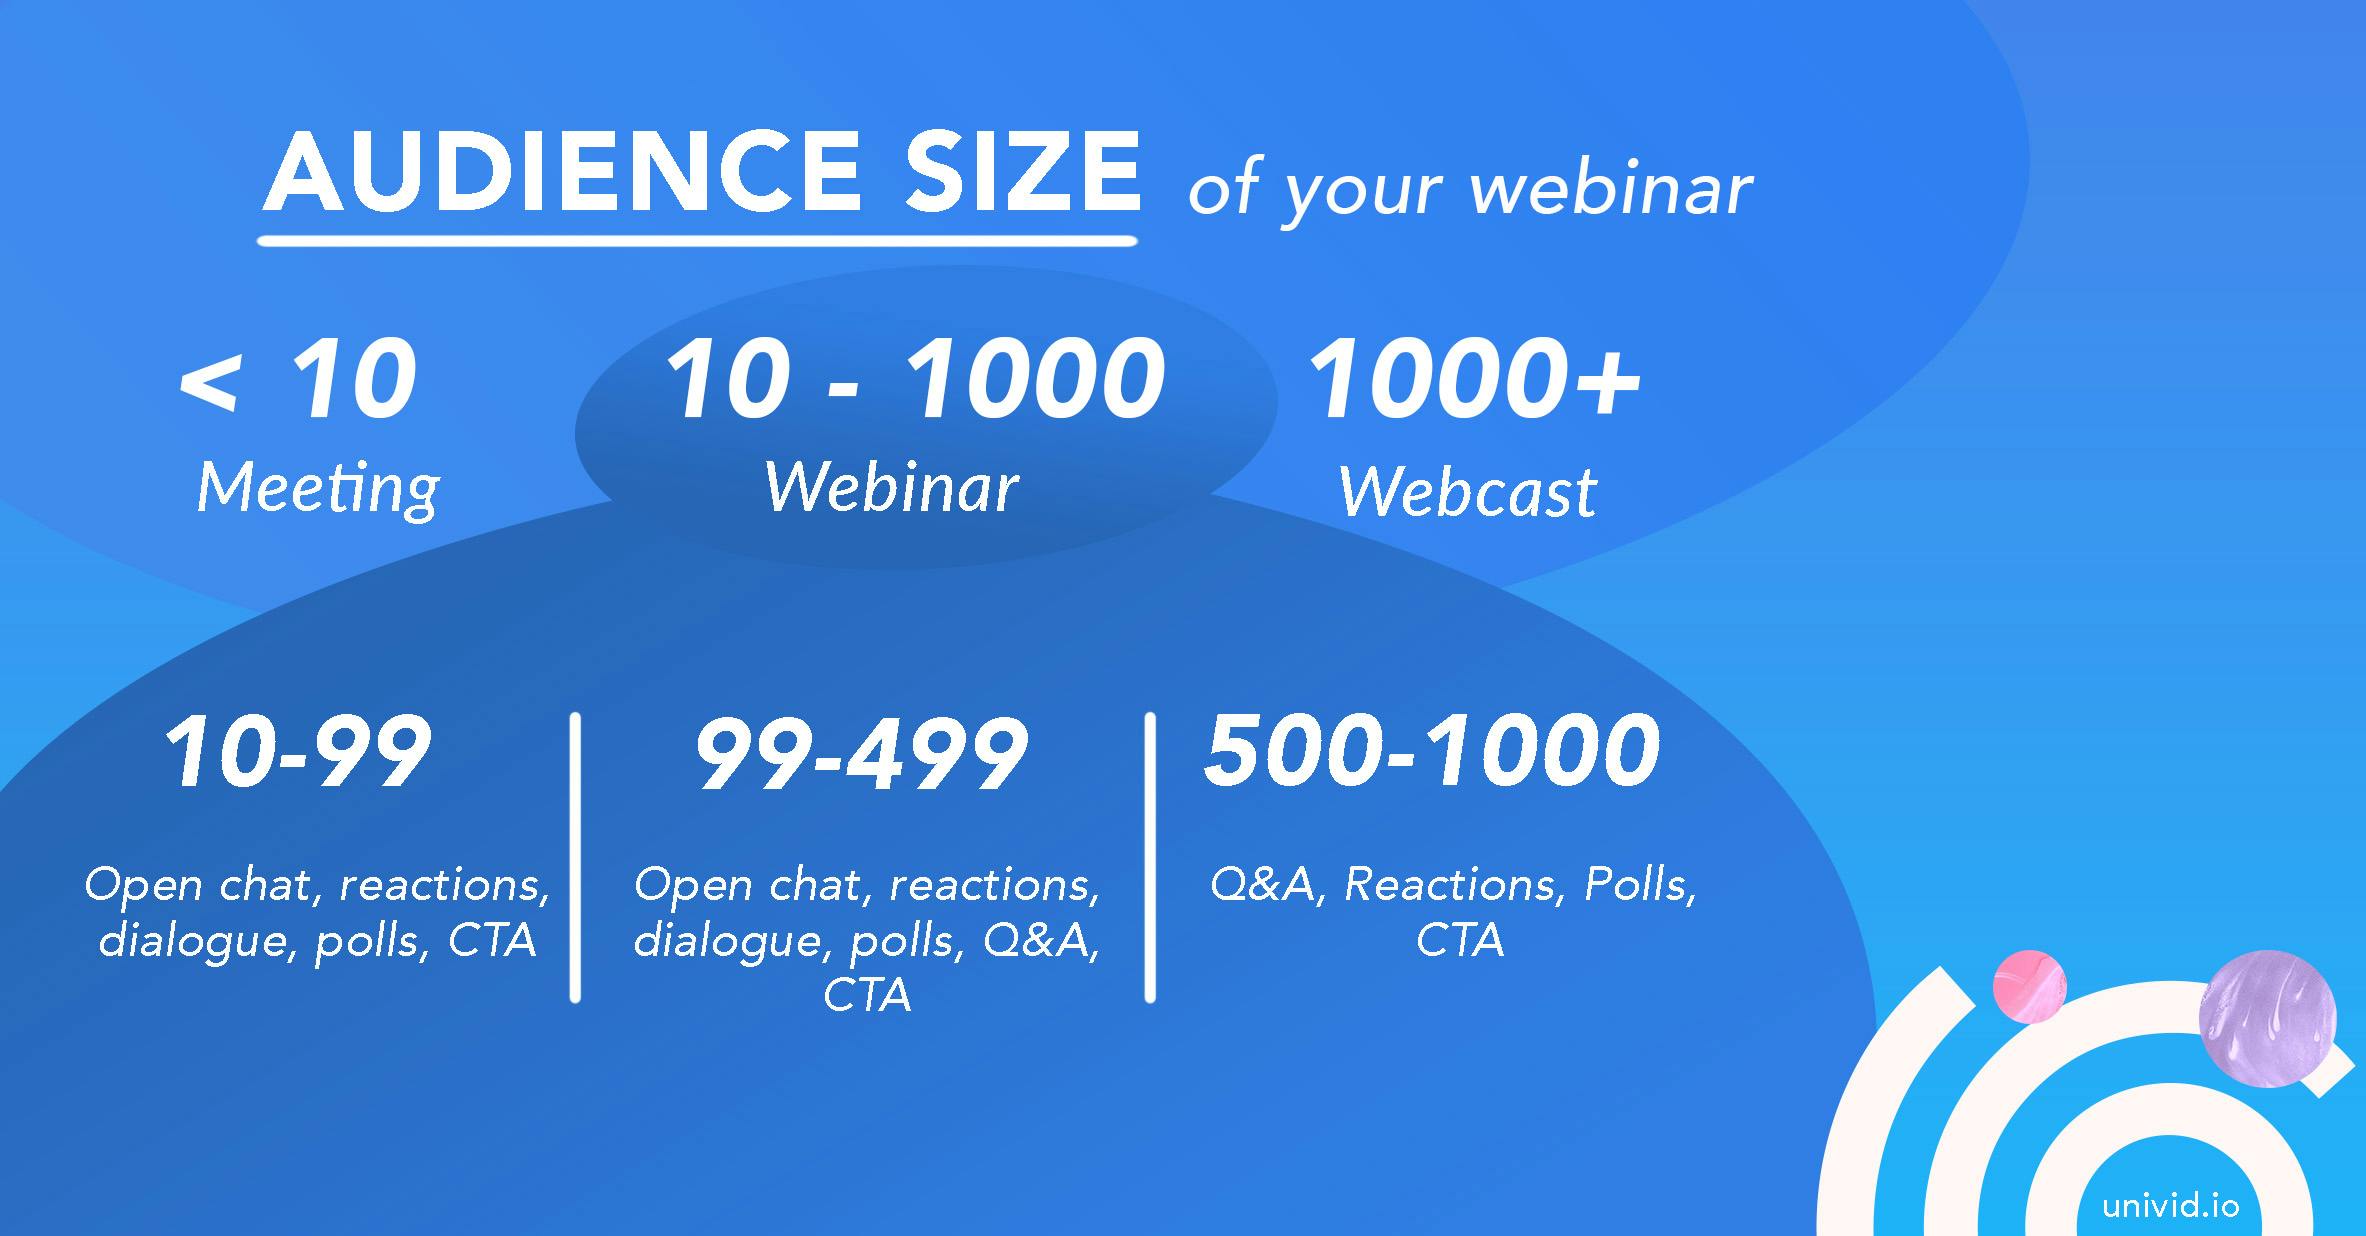  Webinar audience size determines interaction